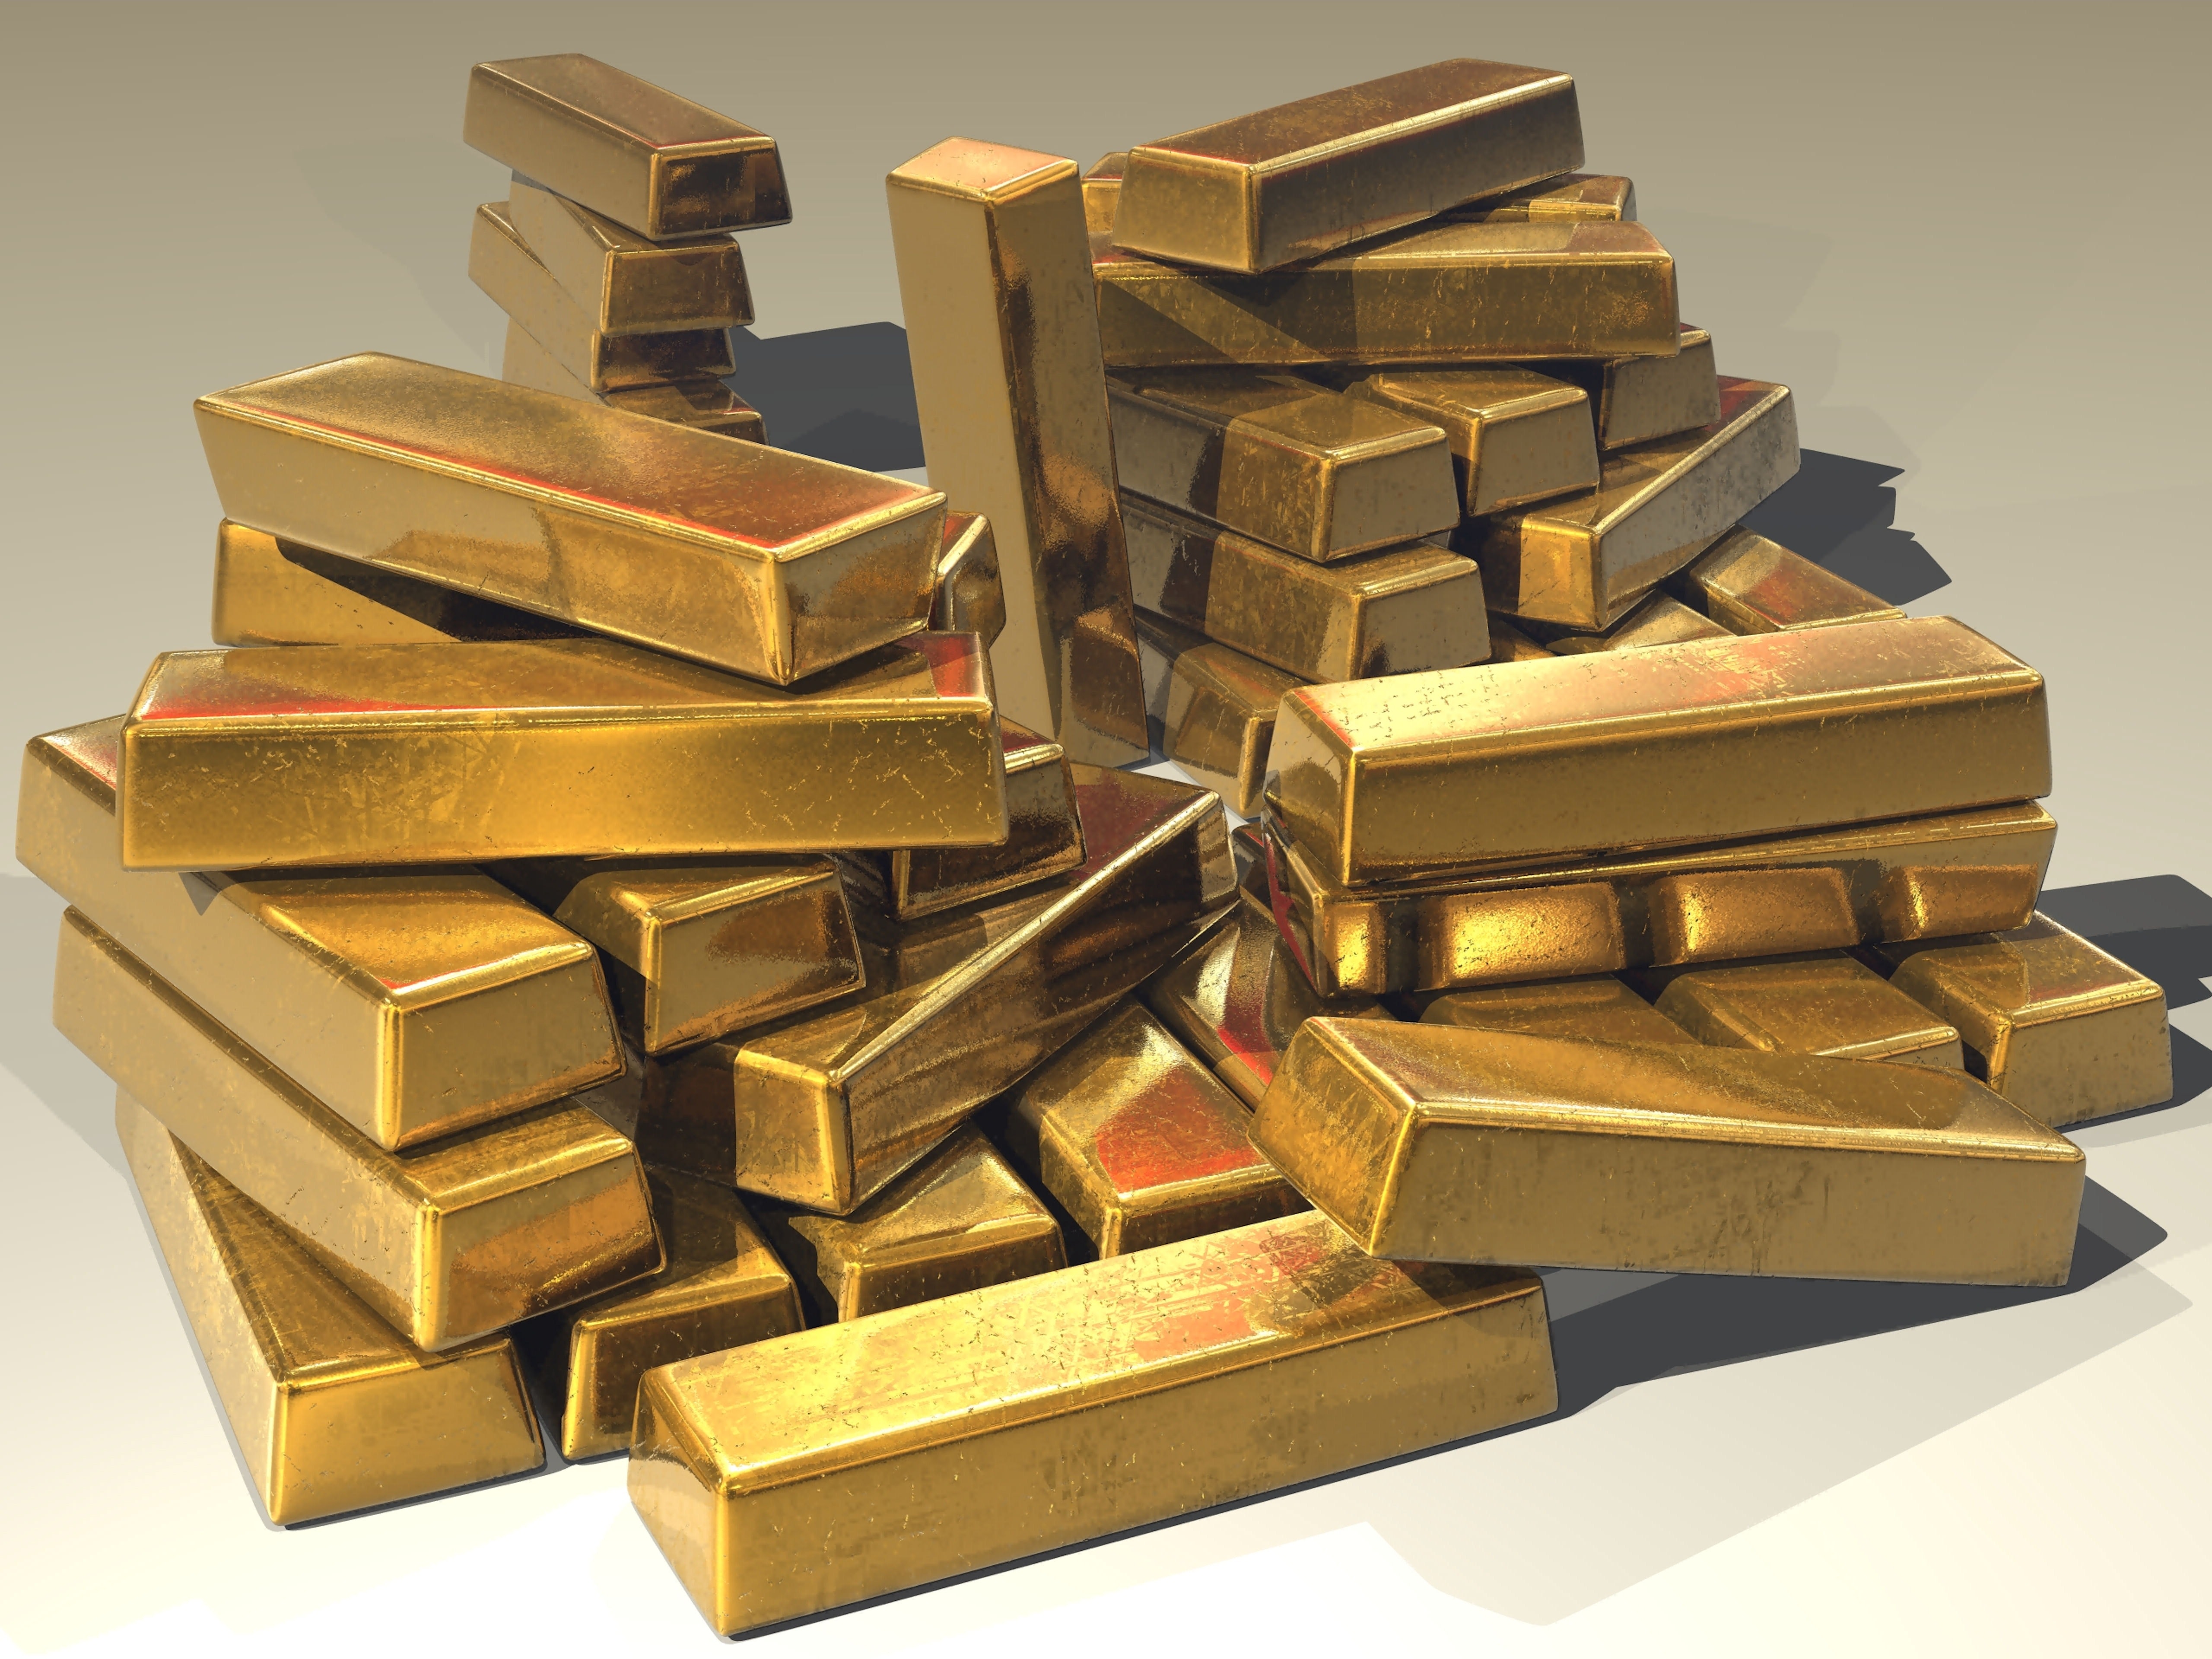 Reputable gold investment firms